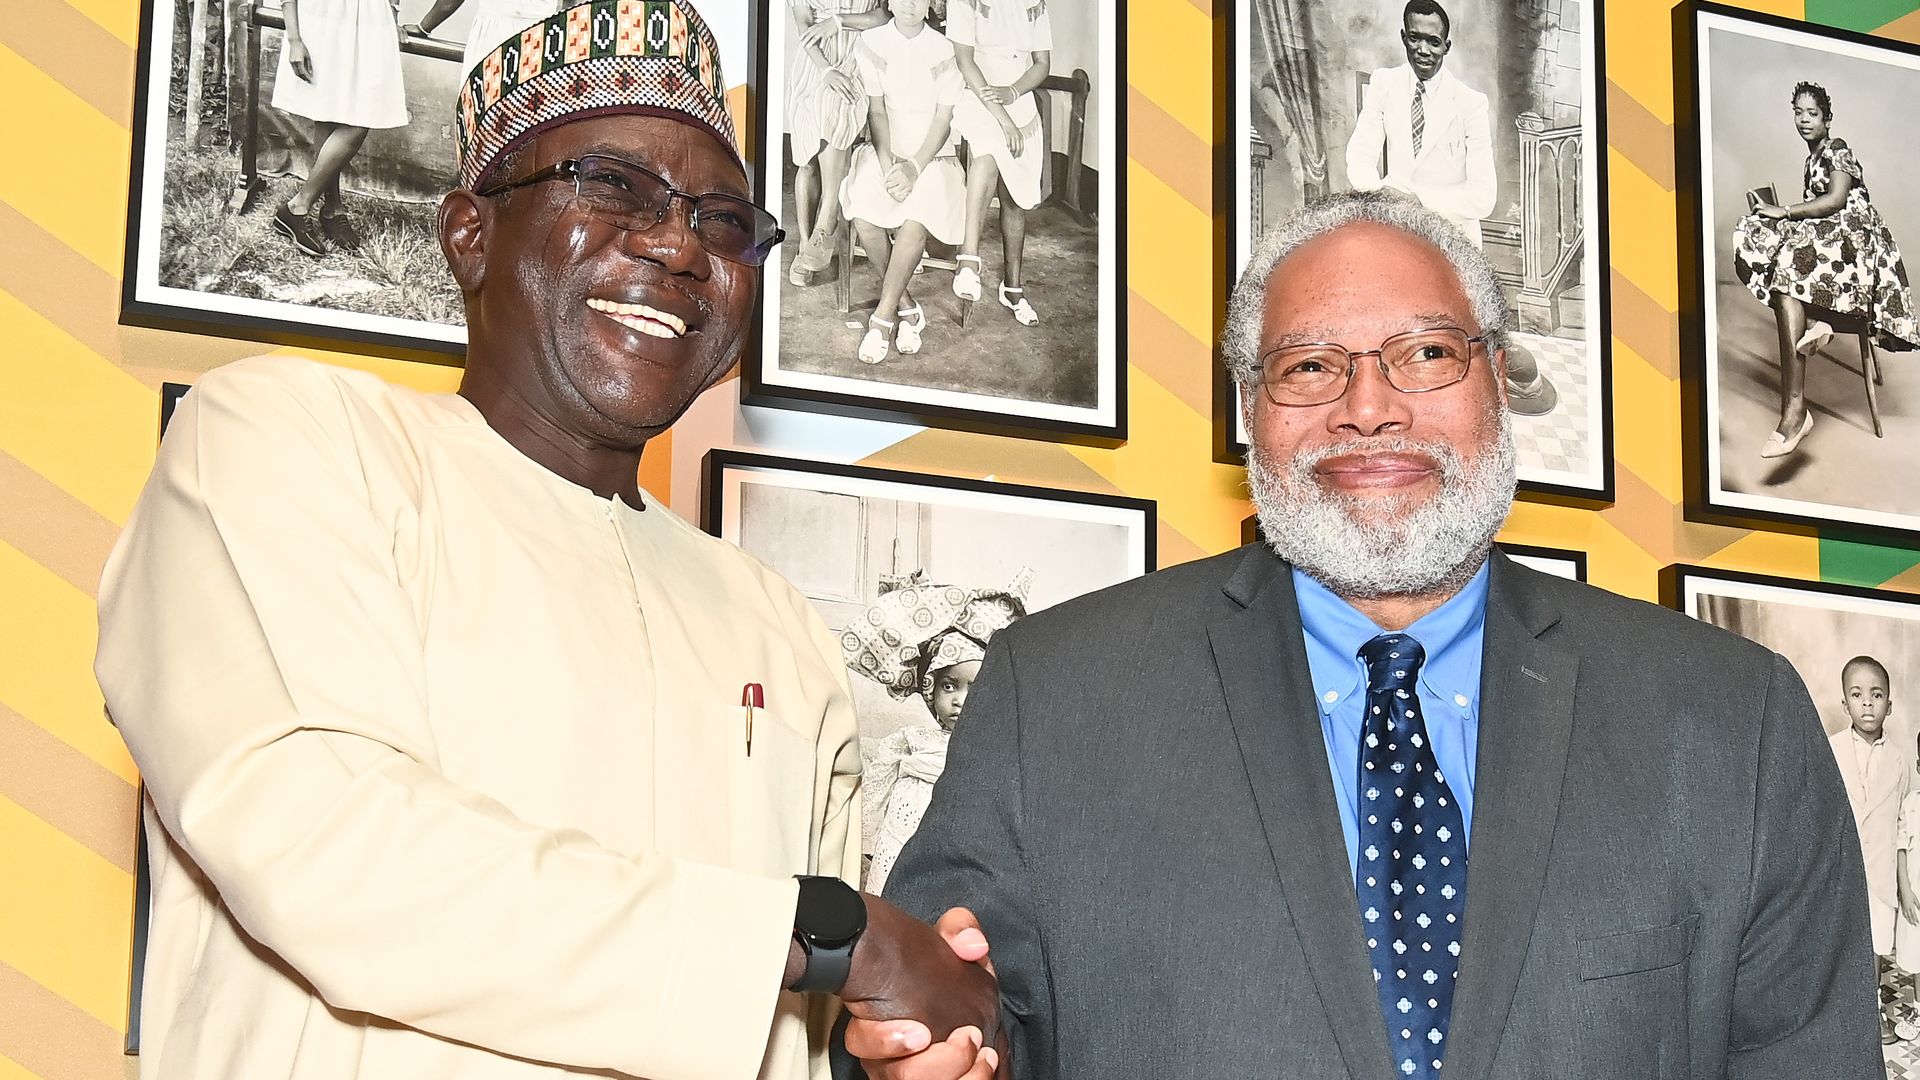 Dr. Abba Isa Tijani, a Nigerian professor, shakes hands with Lonnie Bunch fromthe Smithsonian at a repatriation ceremony at the National Museum of African Art on October 11 in Washington, DC. 